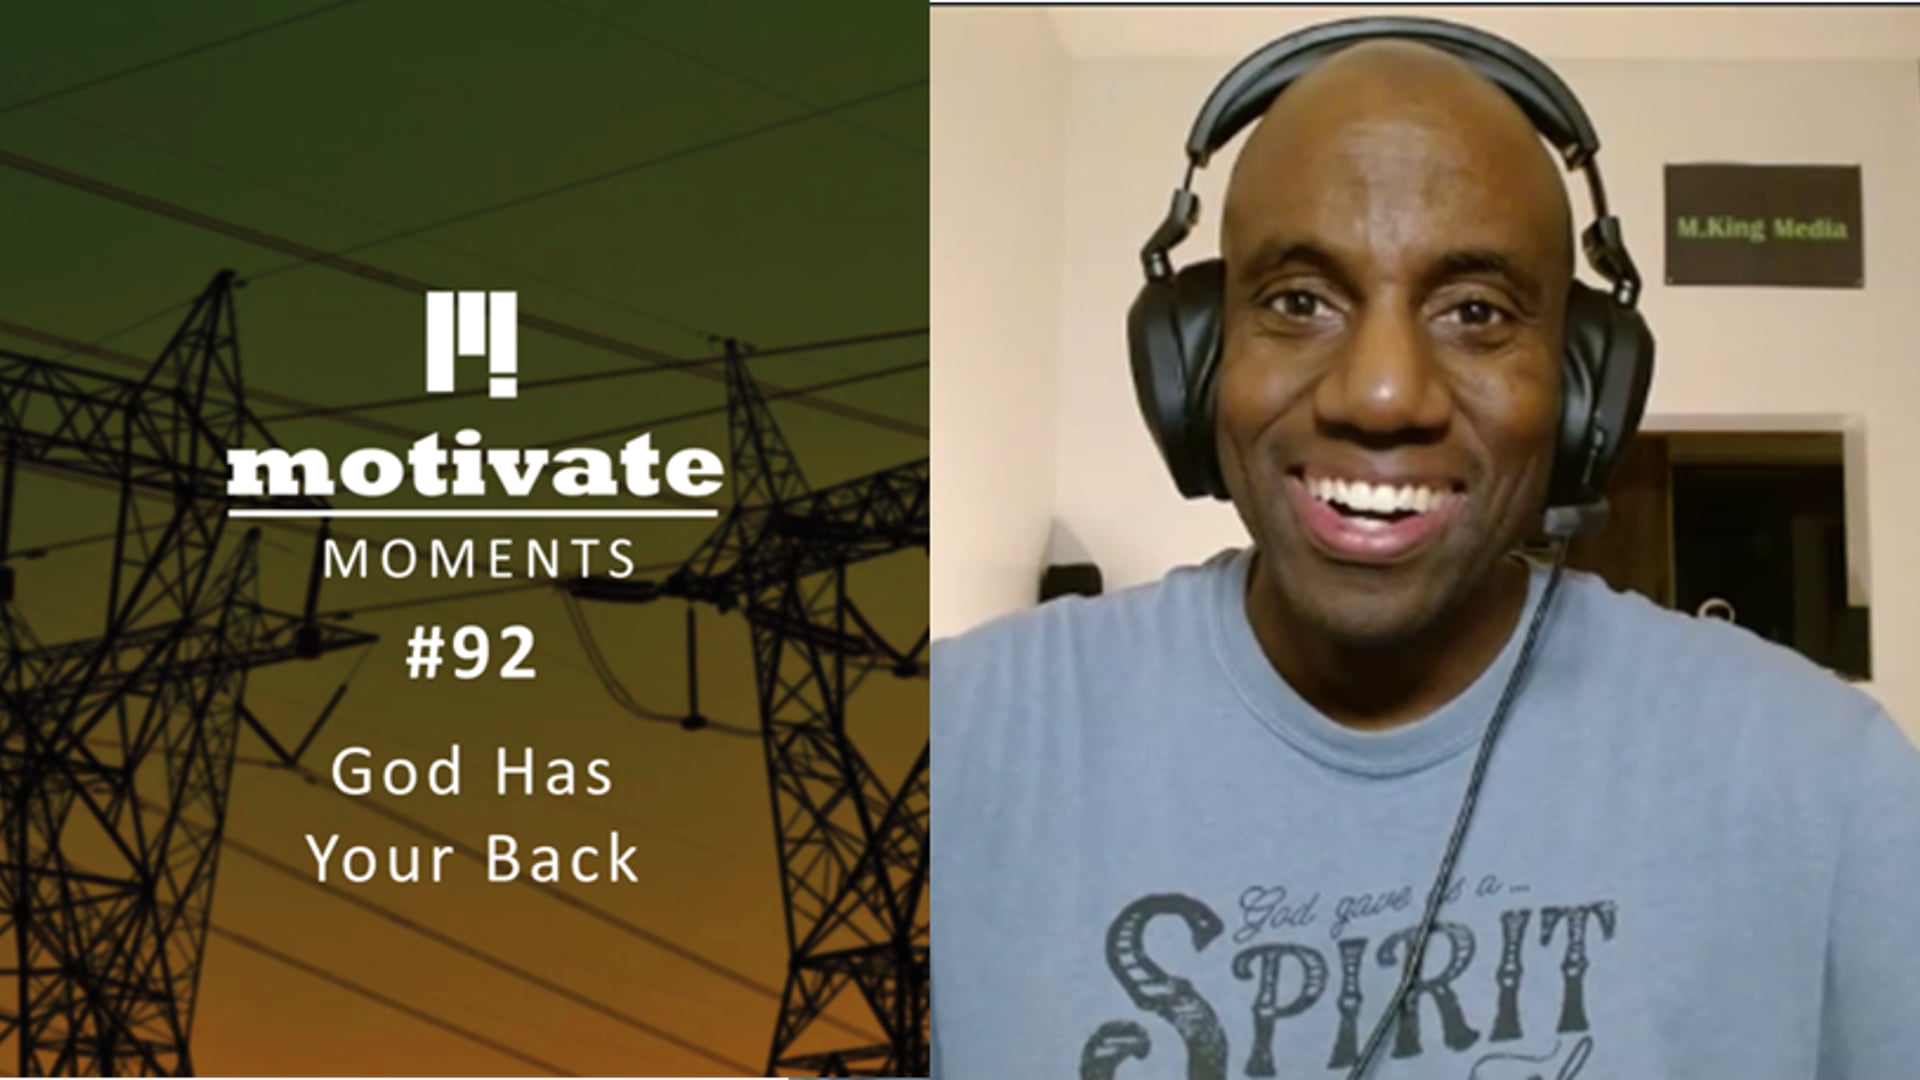 Motivate Moments #92: God Has Your Back